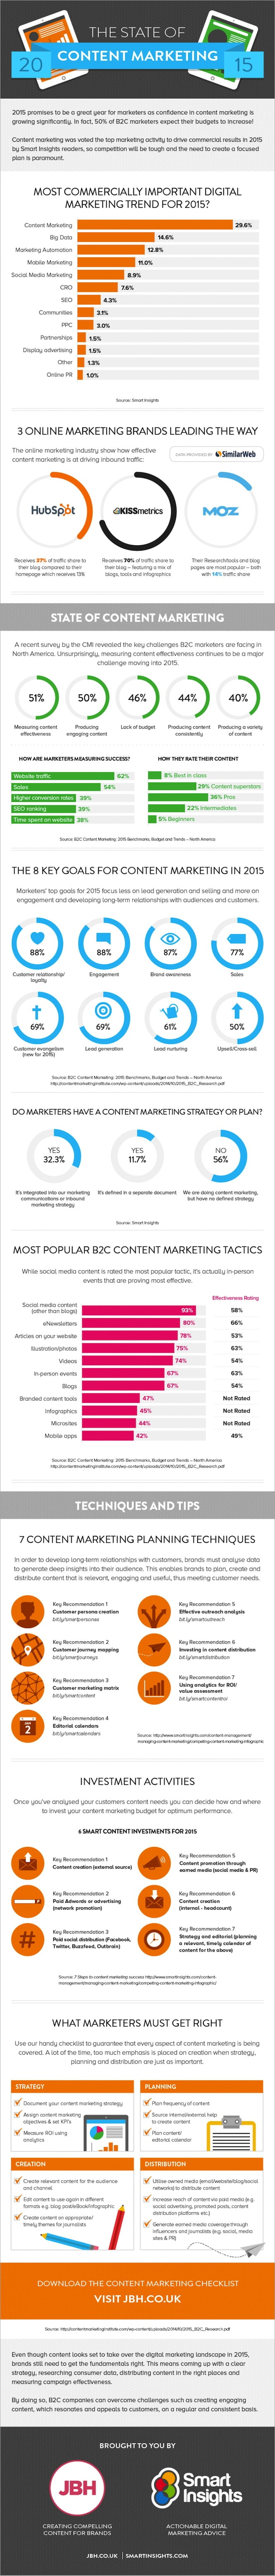 the-state-of-content-marketing-2015_552d31d3303b9_w1500